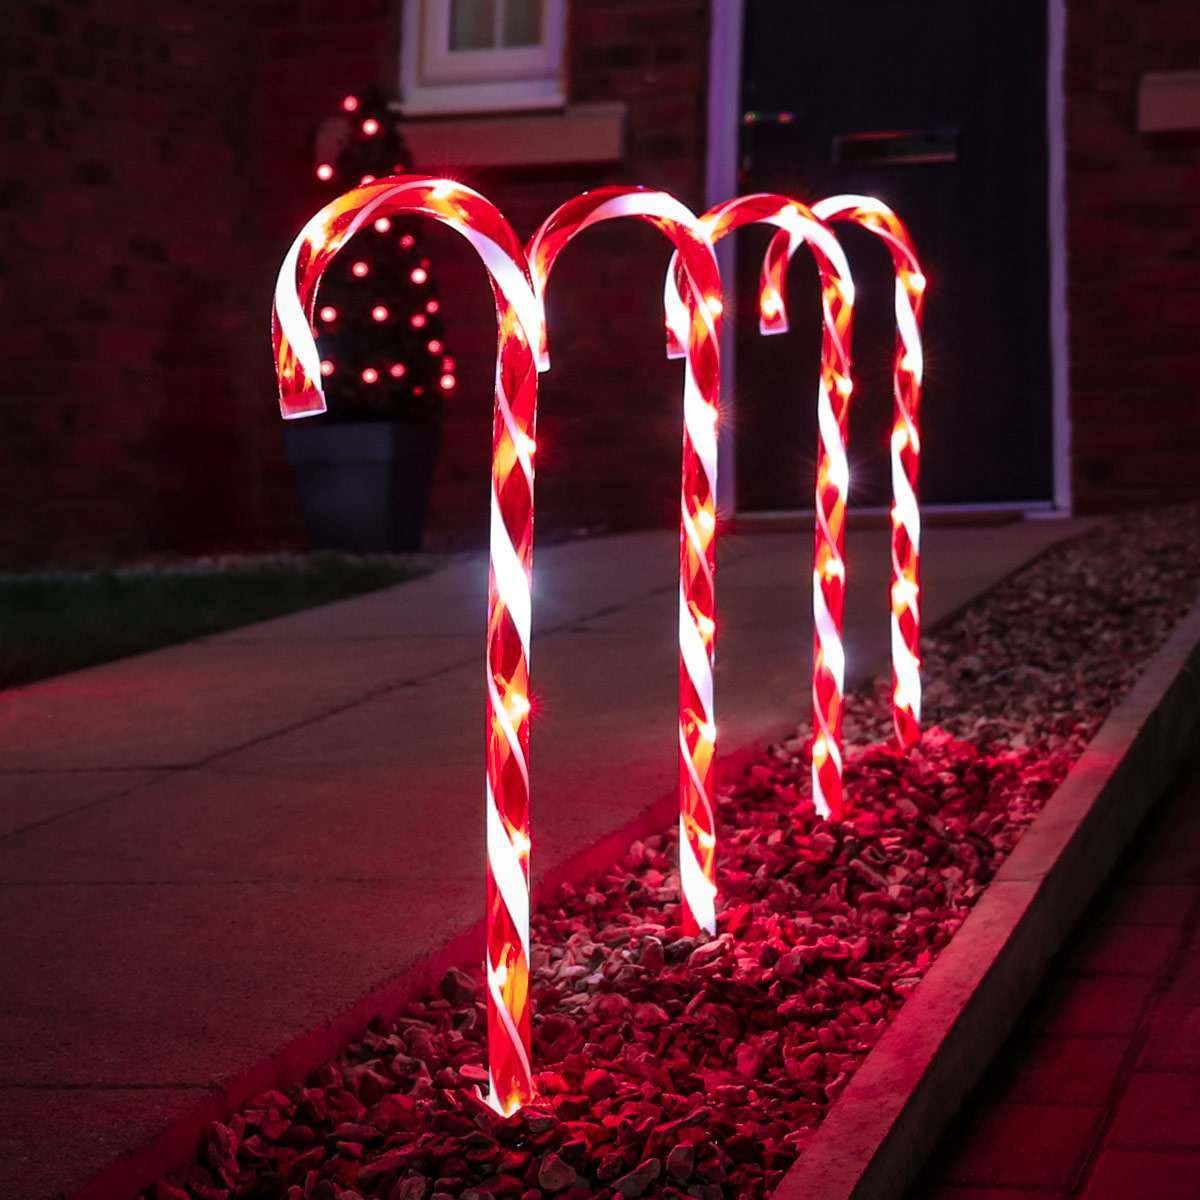 Candy Cane Christmas Lights
 Outdoor Red and White Candy Cane Christmas Stake Lights 4